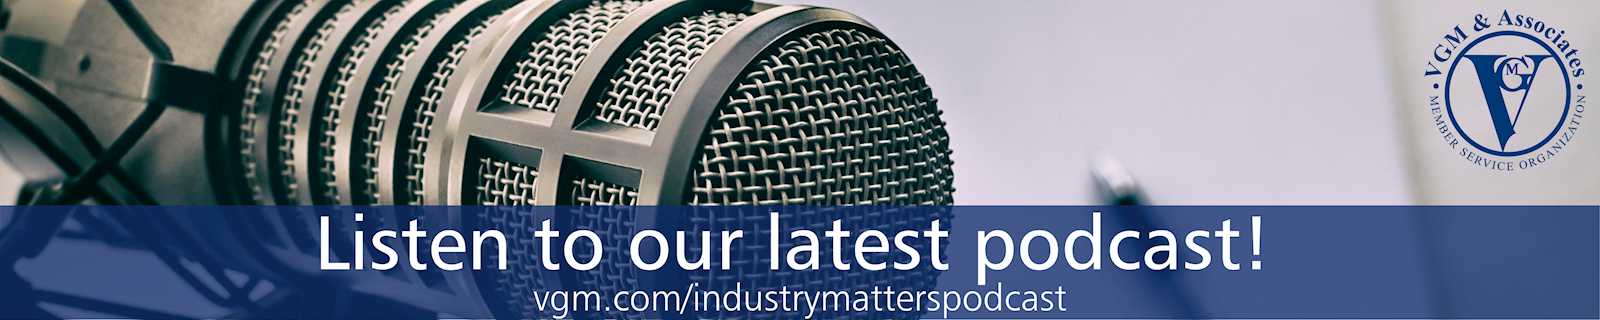 Industry Matters Podcast